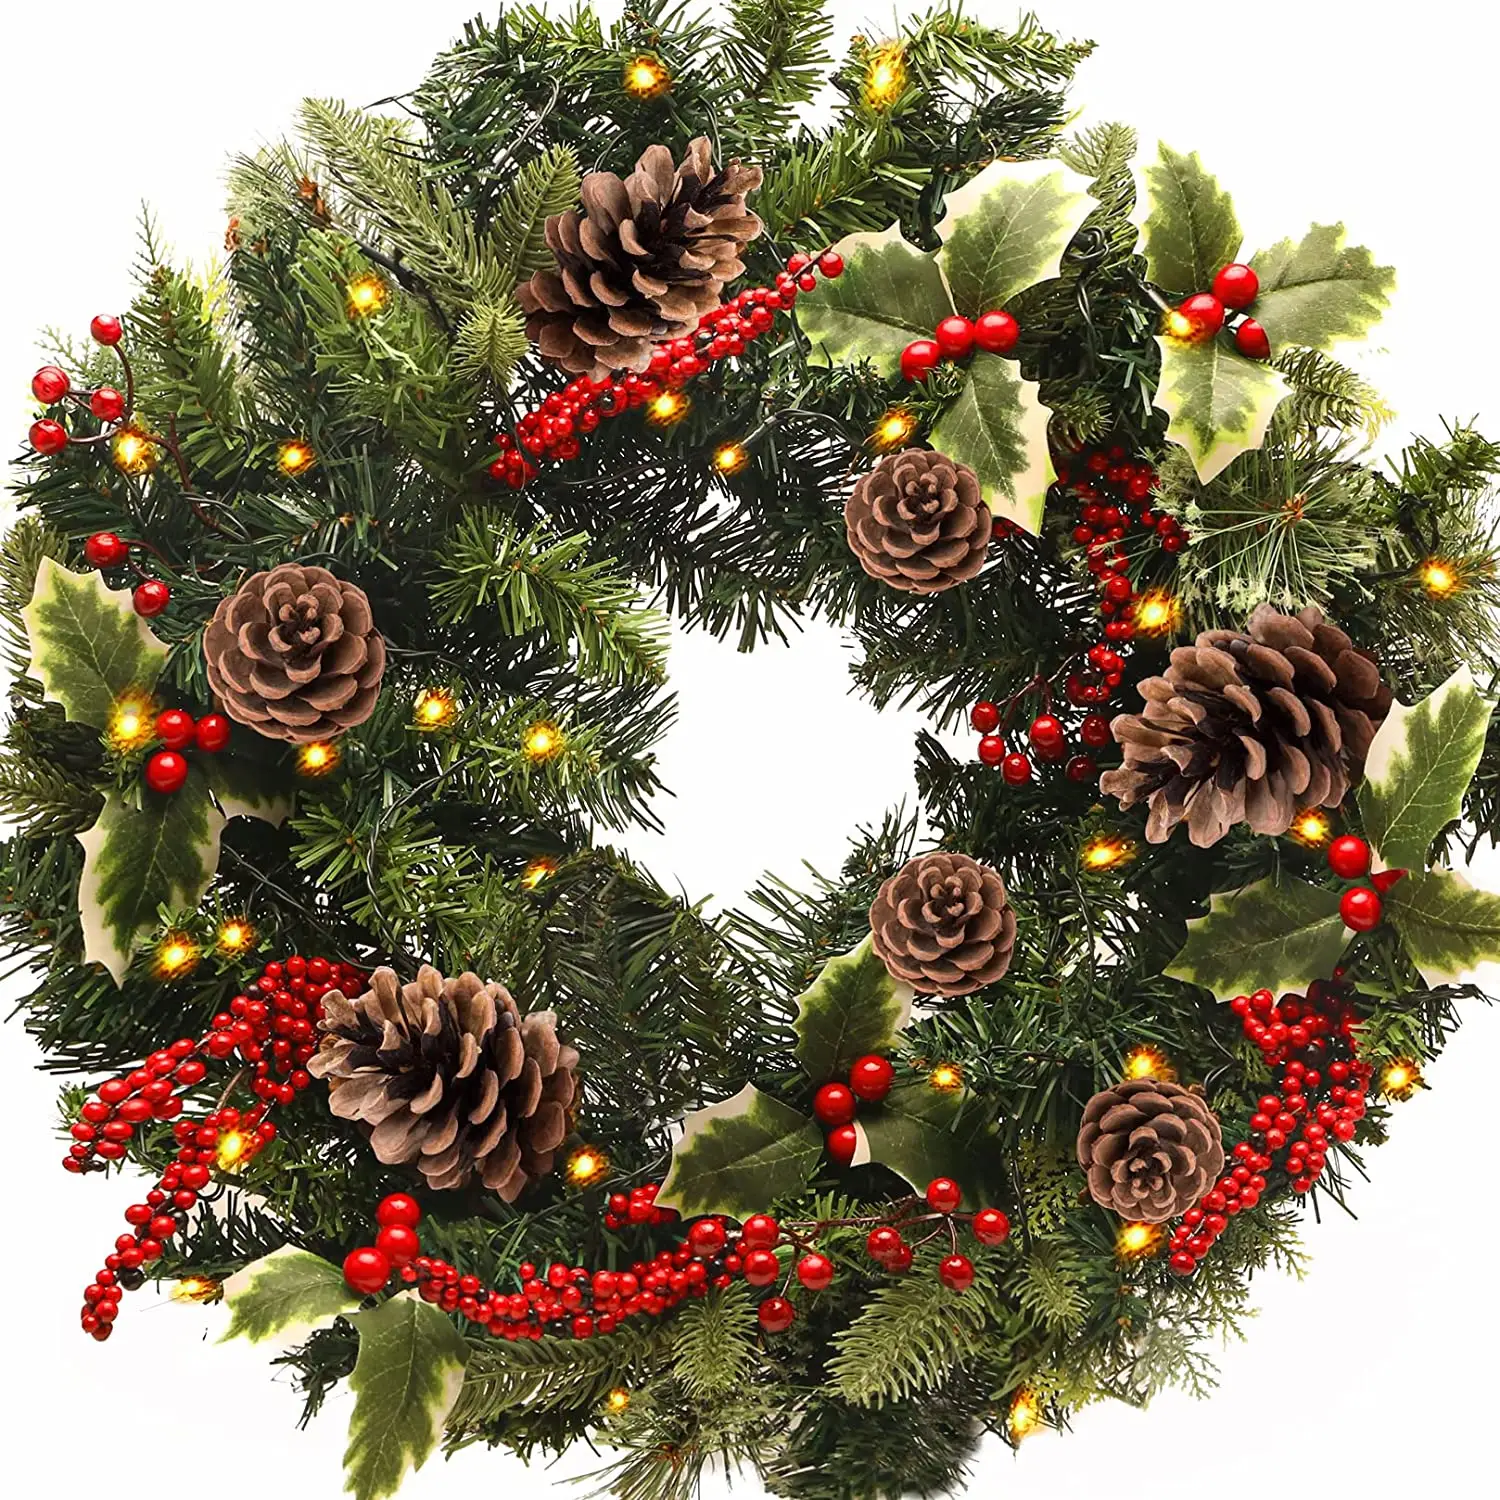 24 Inch Christmas Wreath, Outdoor Lighted Christmas Wreath for Front Door, Xmas Wreath for Holiday Christmas Party Decorations